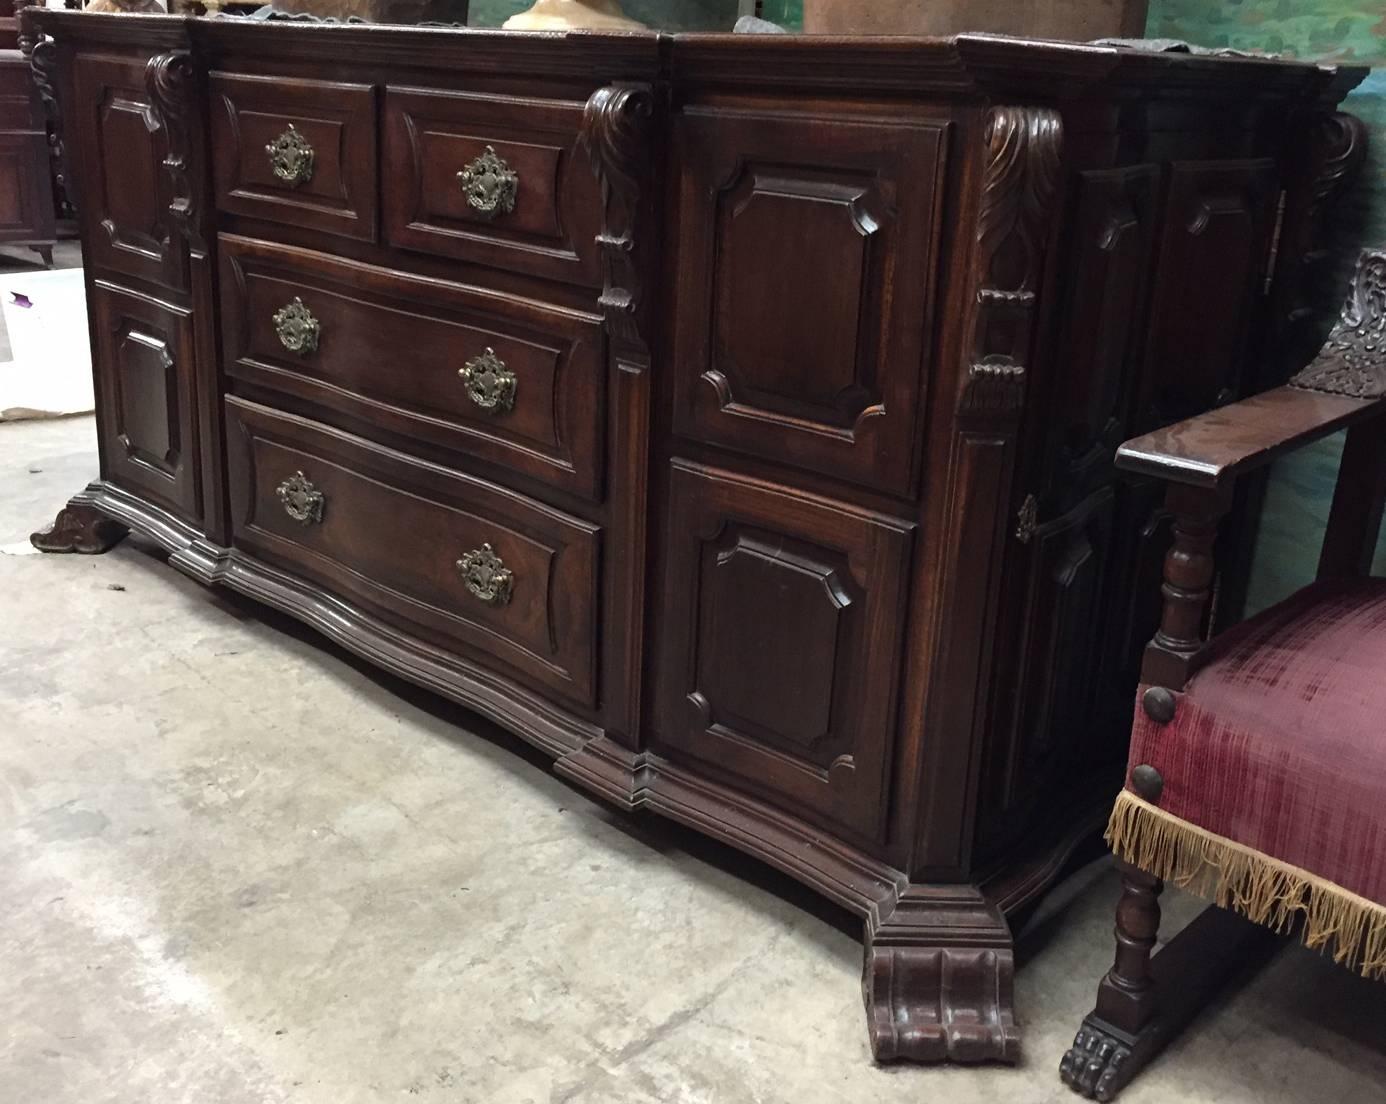 Important large late 18th-Early 19th century Brazilian Baroque style jacaranda rosewood credenza. The beautiful solid Jacaranda top over four drawers with intricate and large bronze handles flanked by two side cabinets with side doors, resting on